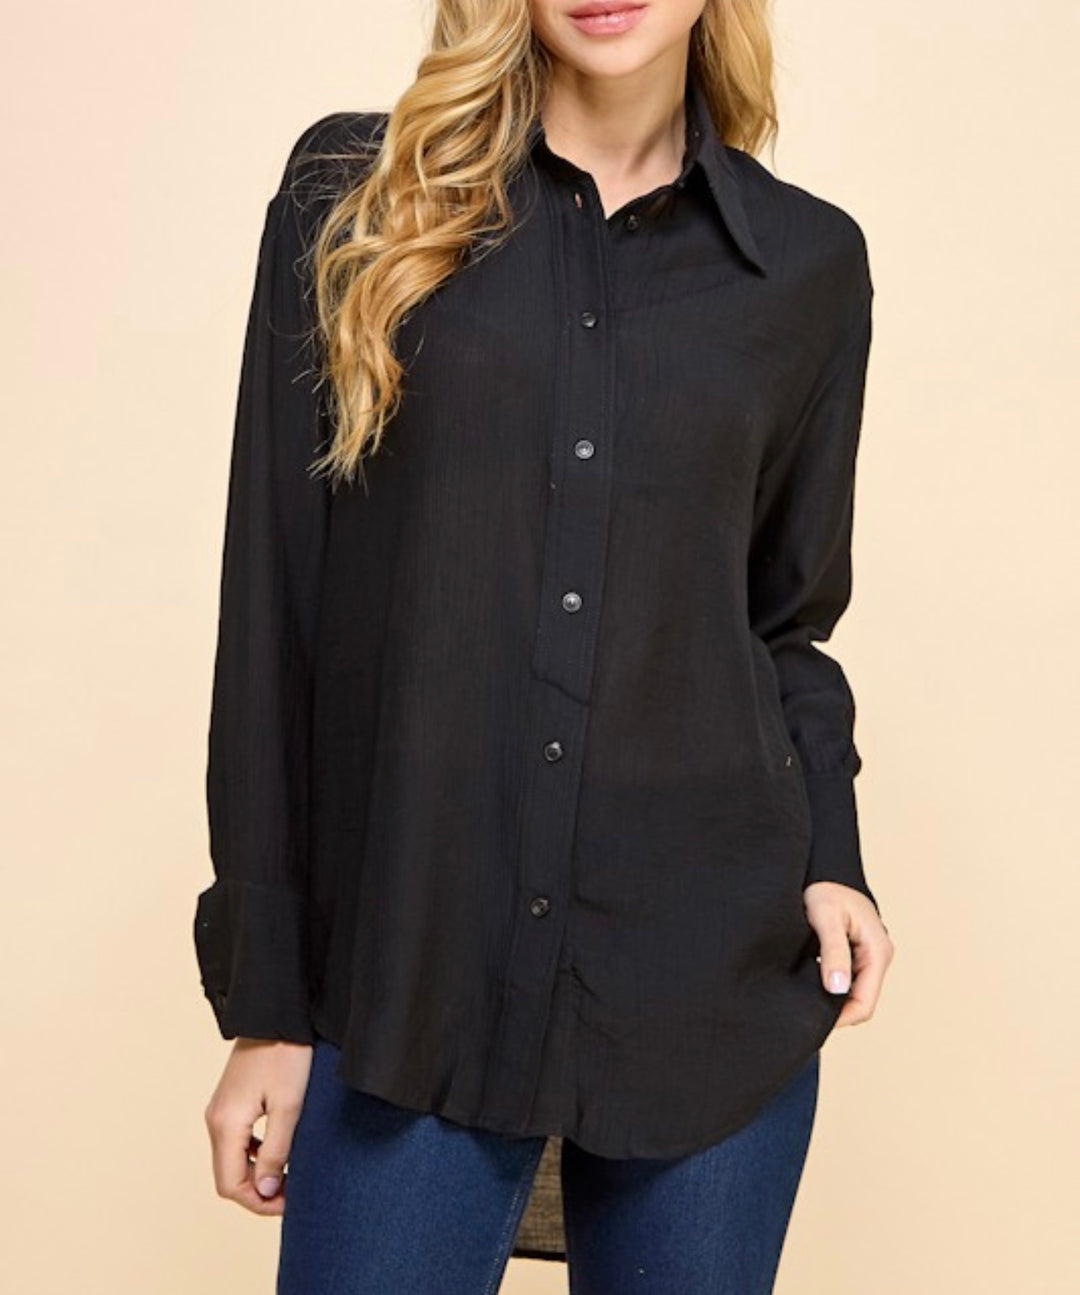 Crinkled Textured Button Up Long sleeve Shirt in Black